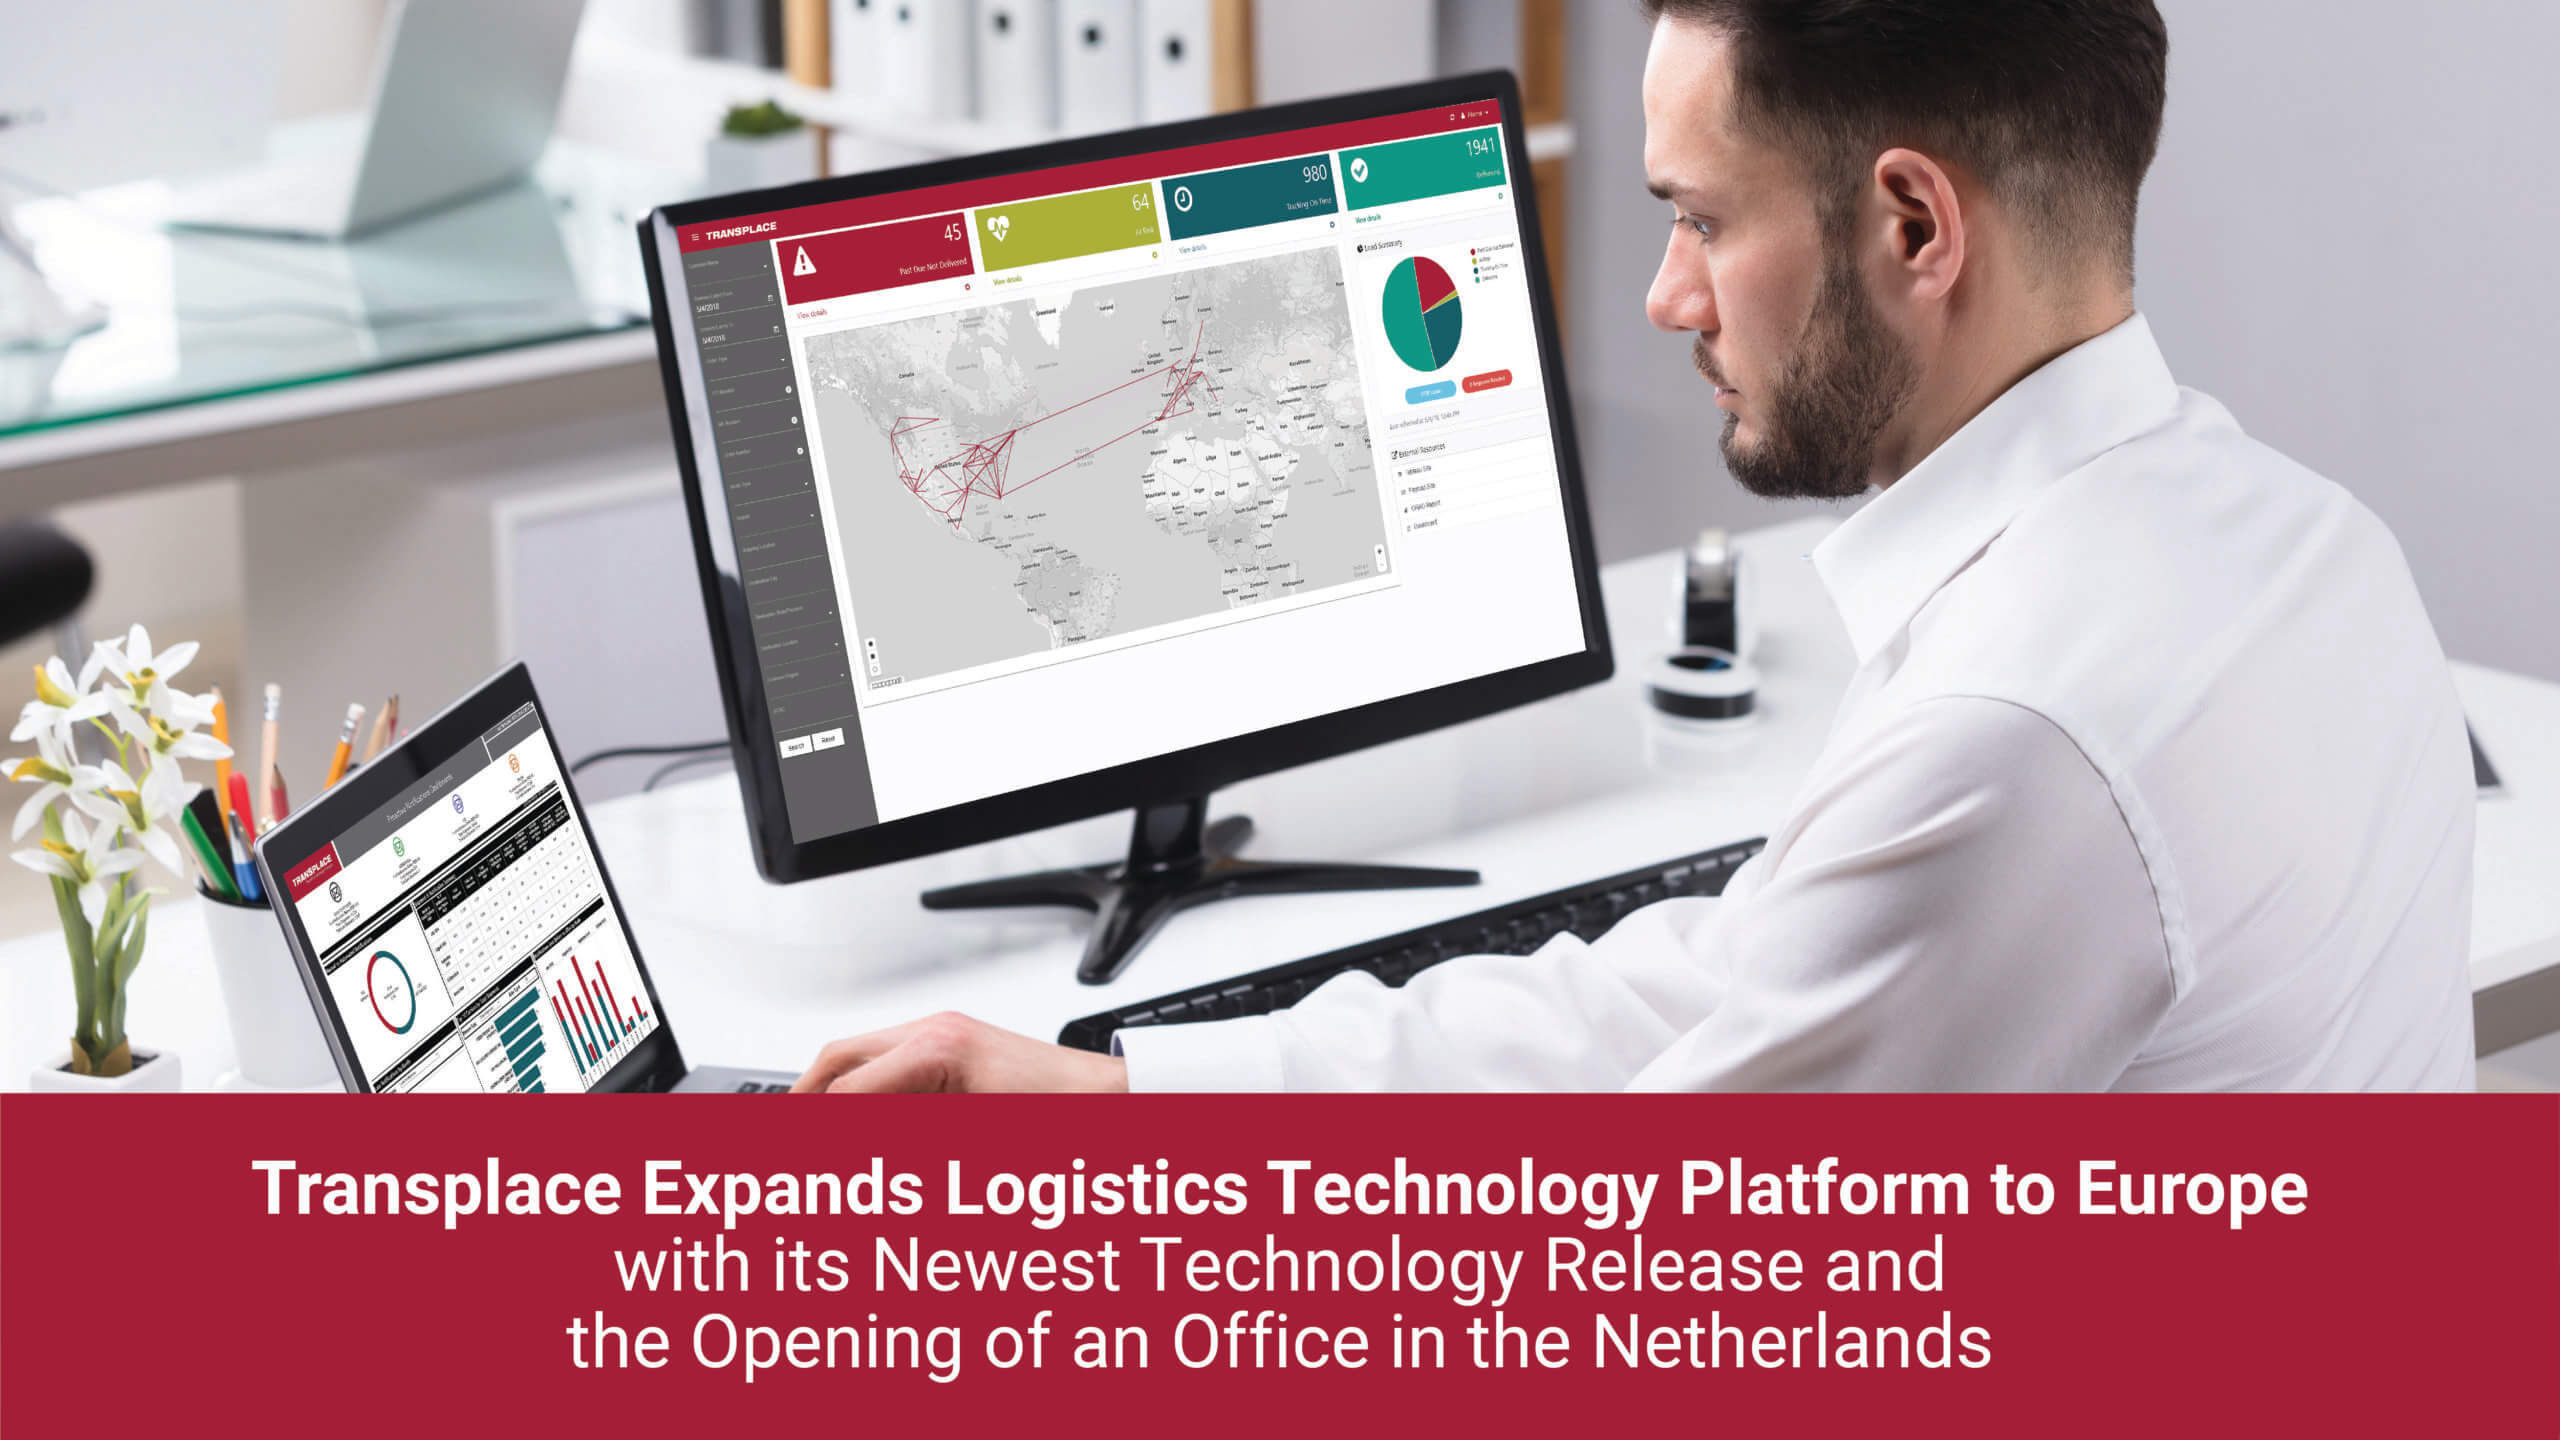 Transplace expands supply chain solutions to the Netherlands logistics sector